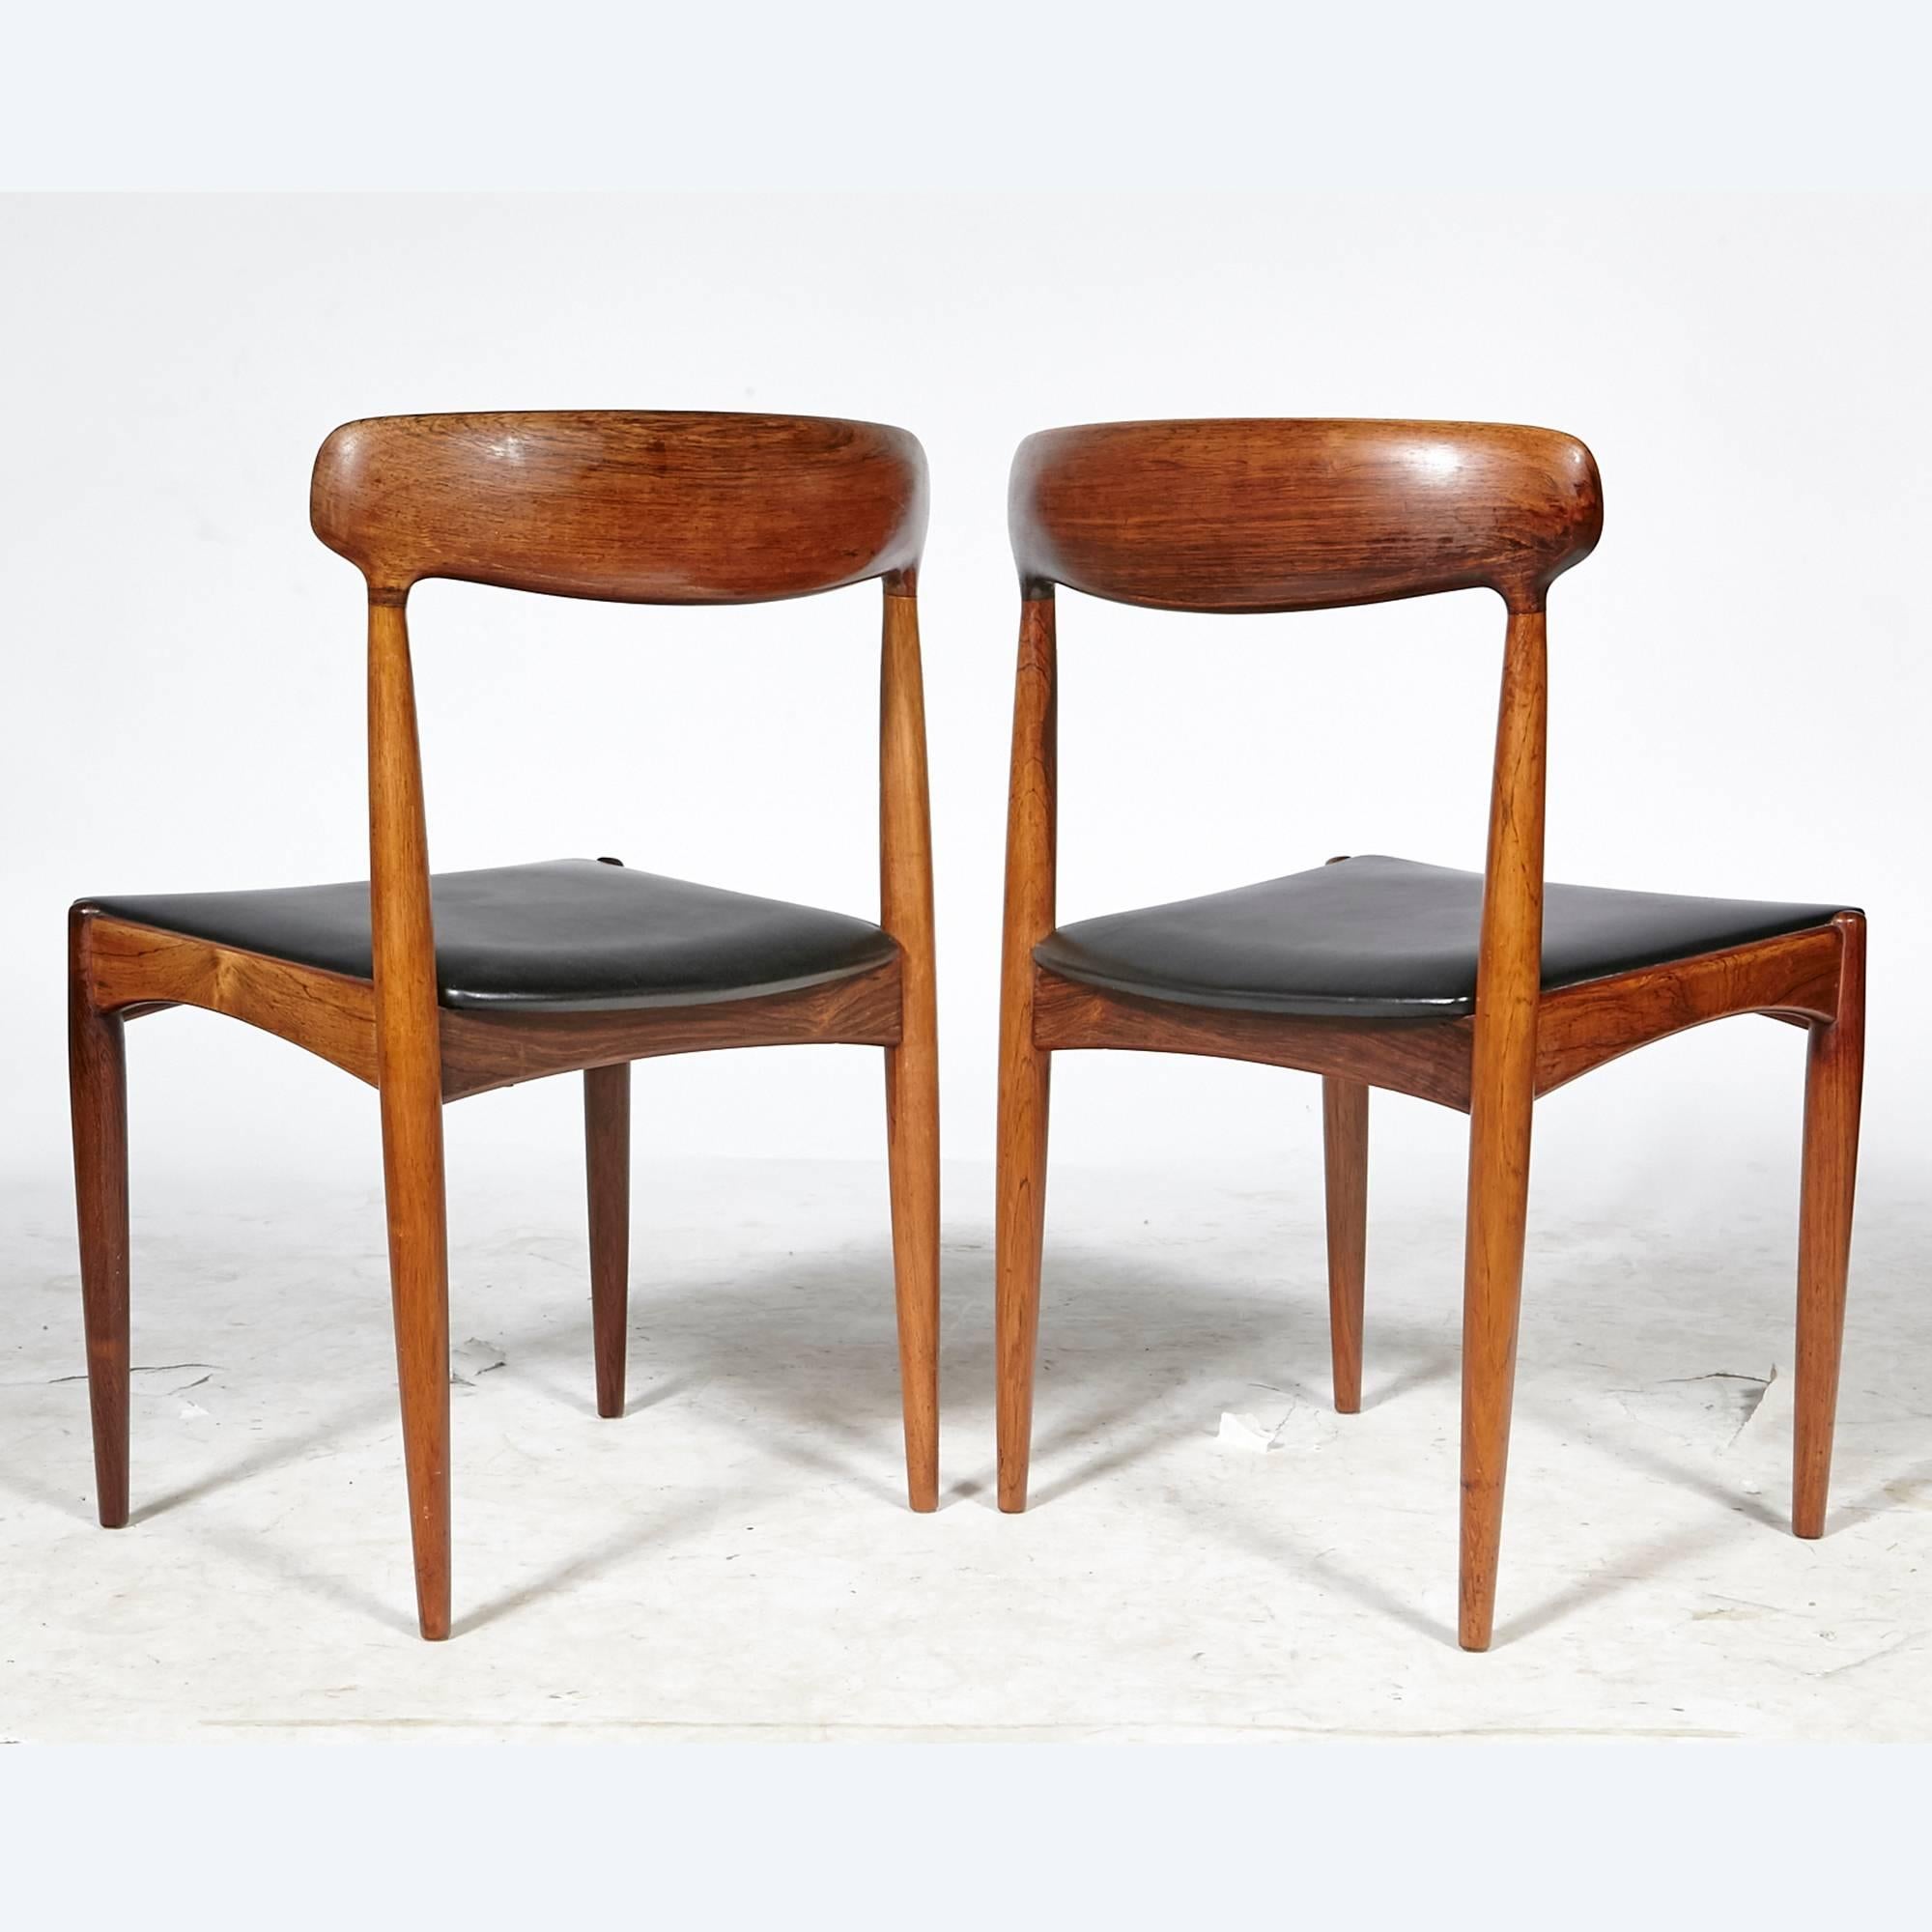 Danish Rosewood Dining Chairs by Johannes Andersen for Uldum Mobler, 1960s In Good Condition For Sale In Amherst, NH